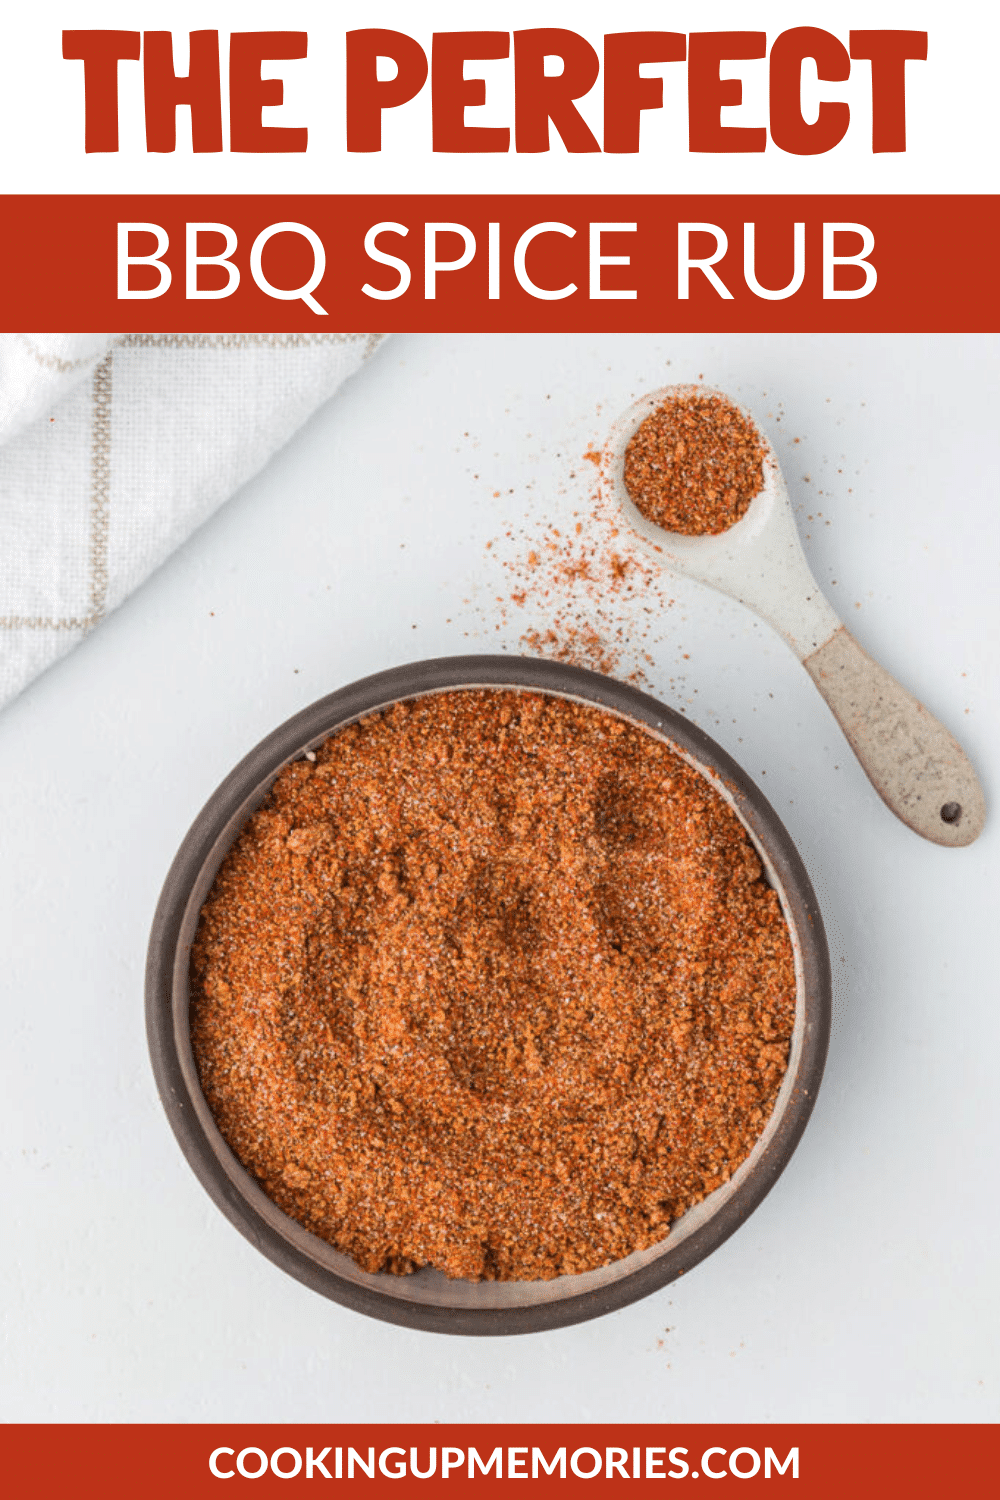 Easy BBQ Spice Rub Recipe - Cooking Up Memories